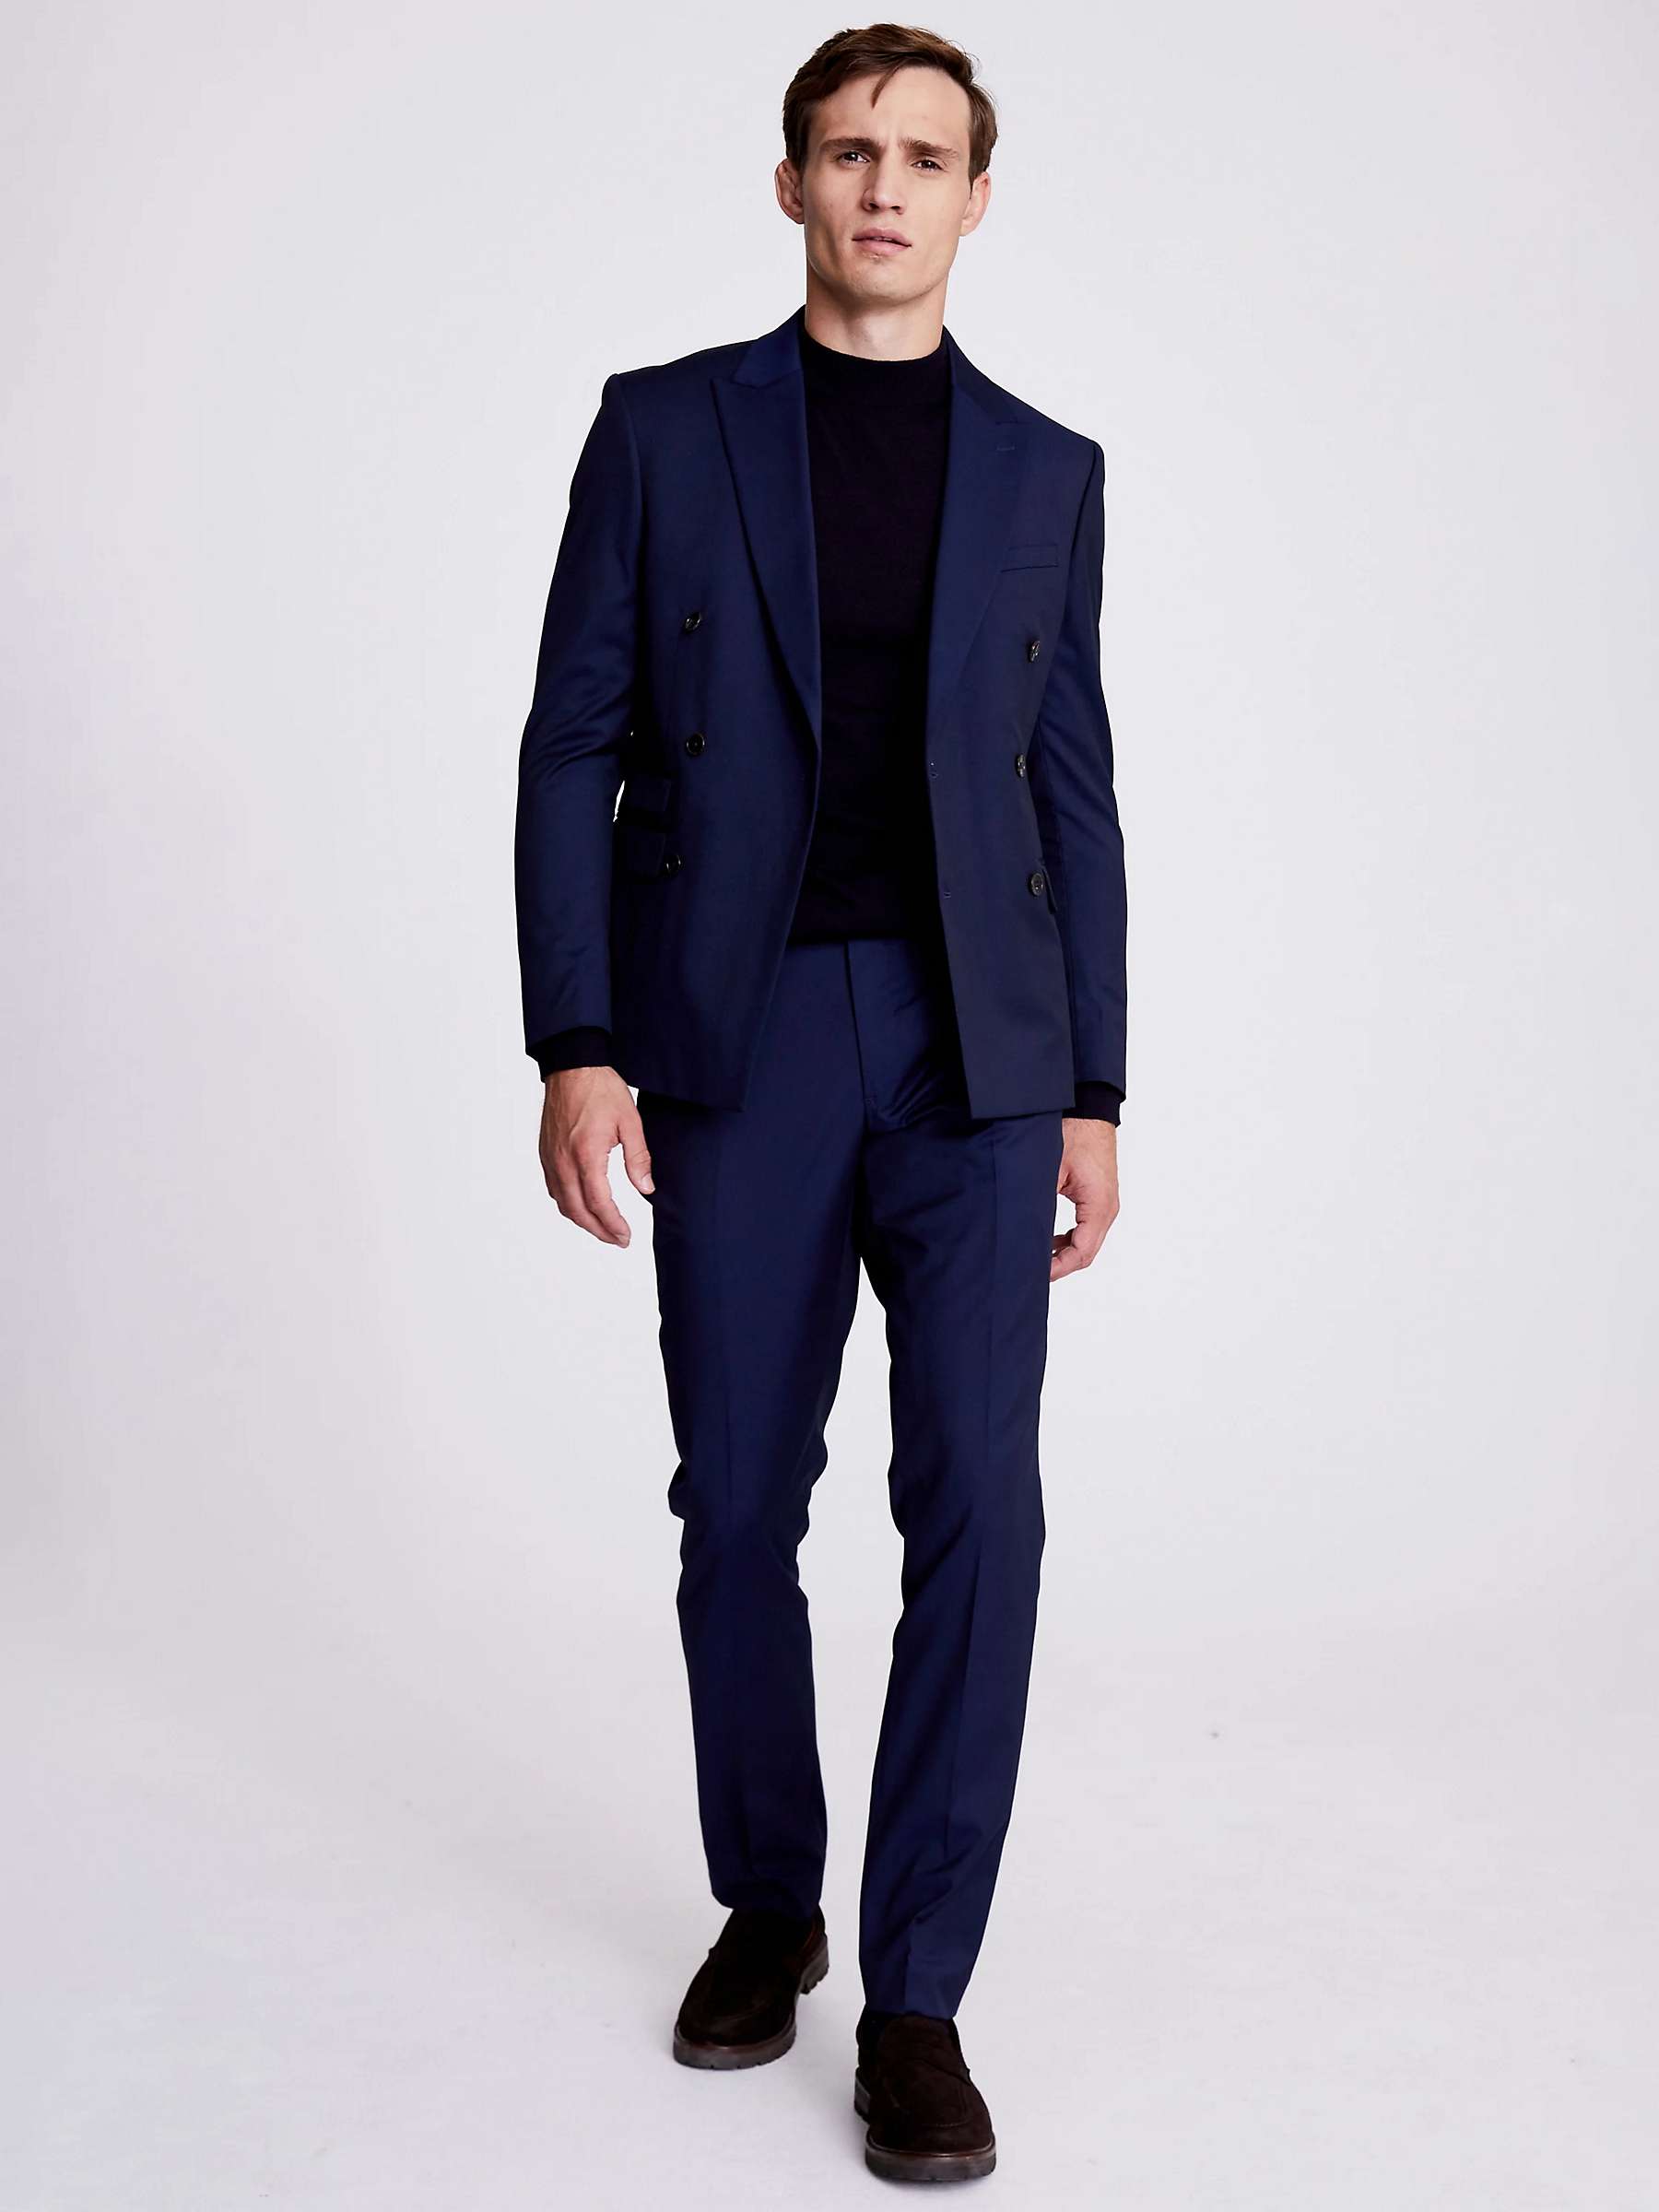 Buy Moss Slim Fit Double Breasted Stretch Jacket Online at johnlewis.com